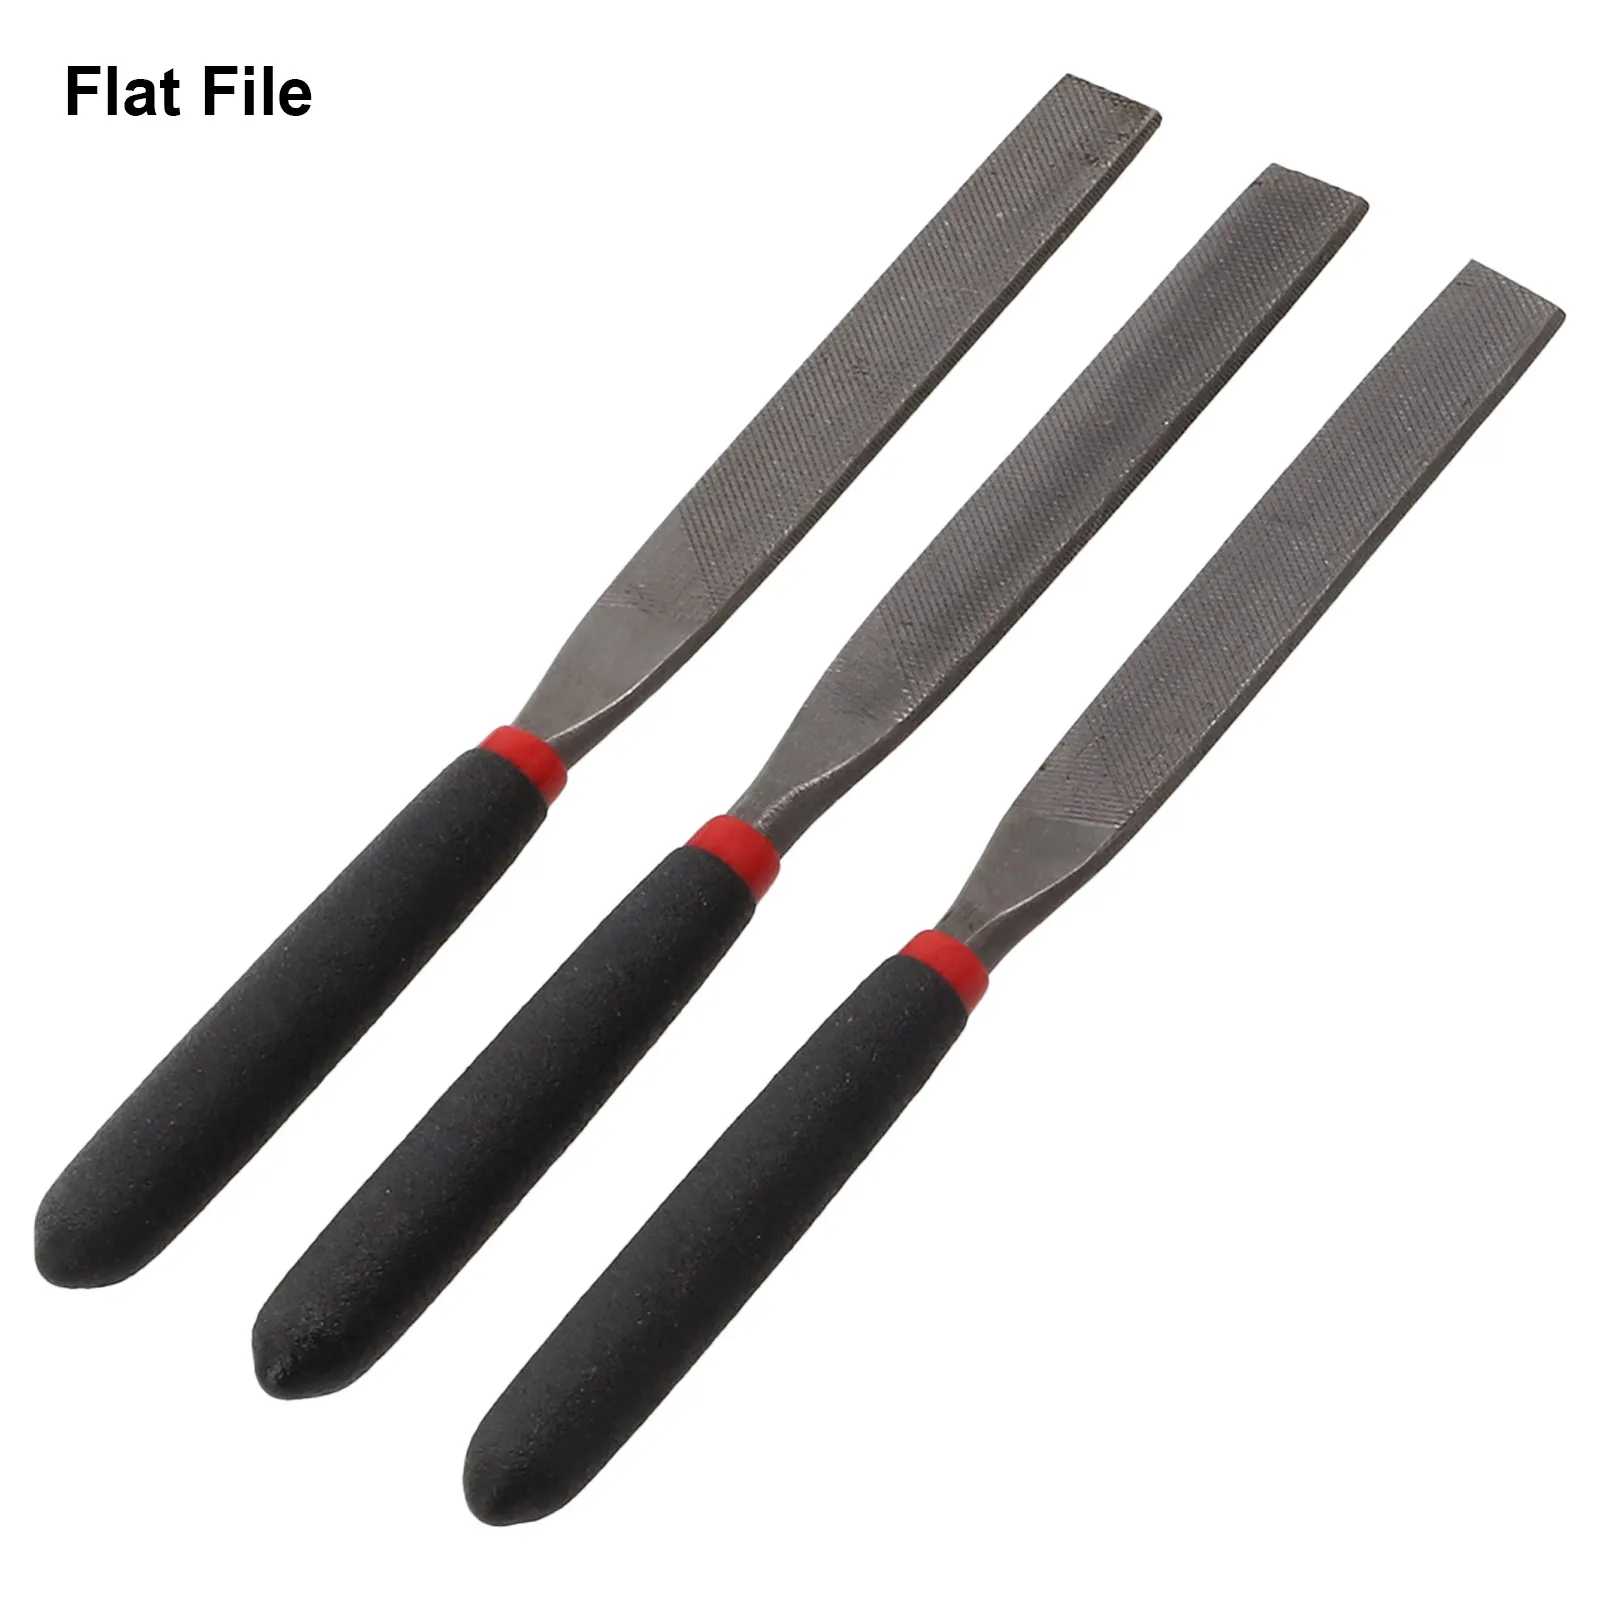 

3pcs Steel Files Needle/Flat File 5mm Shank 118mm Length For Stone Glass Metal Stone Trimming Craft Carving Manual Tools